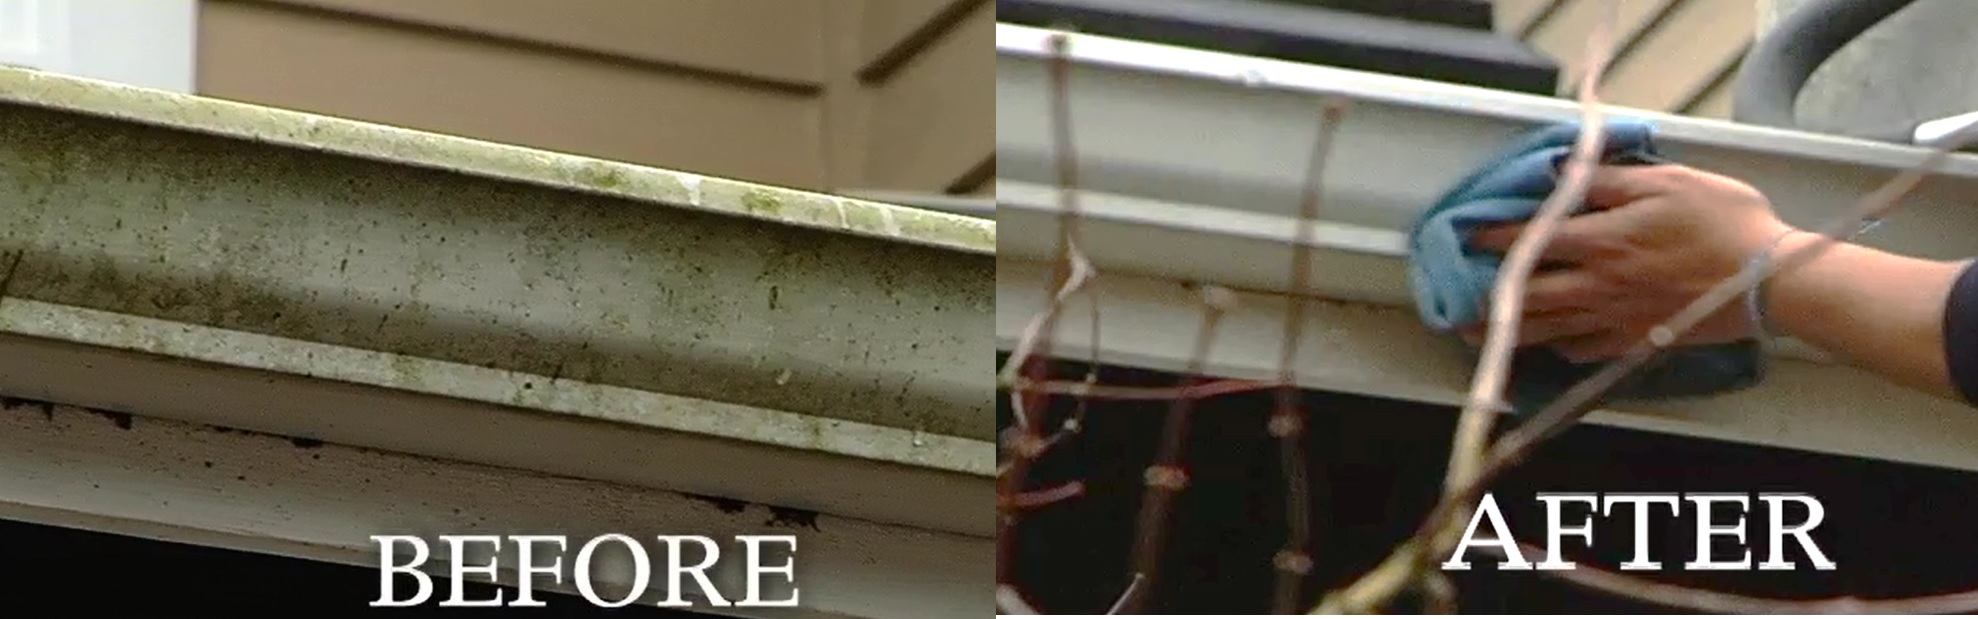 Bellevue Before & After Gutter Cleaning